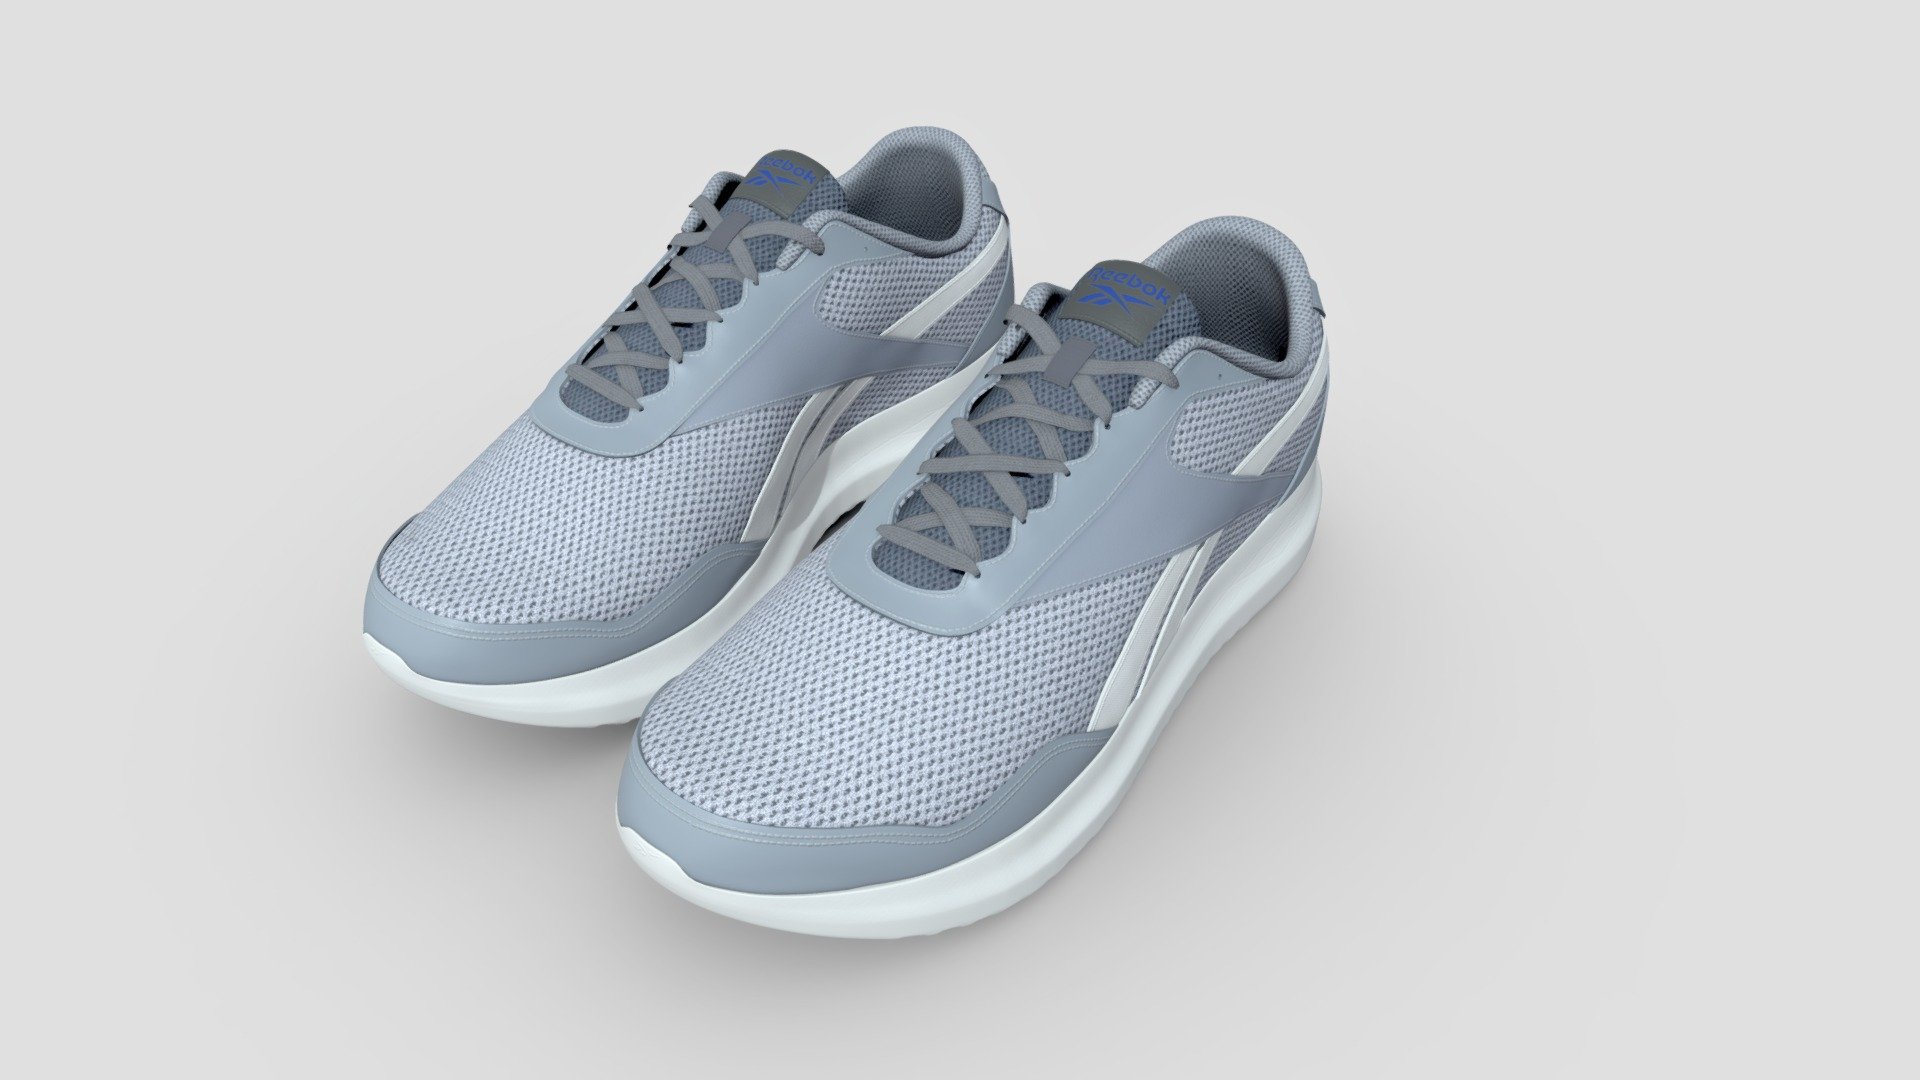 Reebok Energen Lite

men’s lightweight running shoes.

3ds max 2021, Fbx, Obj and Glb.

ideal for your decoration scenes. It is made with PBR materials, this makes it compatible with multiple render engines.

Do you need another color? Request it and I will prepare it for you.

Textures

PBR textures 4096x4096 pixels

each material contains


BasicColor.
AO.
Roughness.
Normal.
Metalness.
Opacity.

Have a nice day! - Reebok Energen Lite - Buy Royalty Free 3D model by hado (@hado3d) 3d model